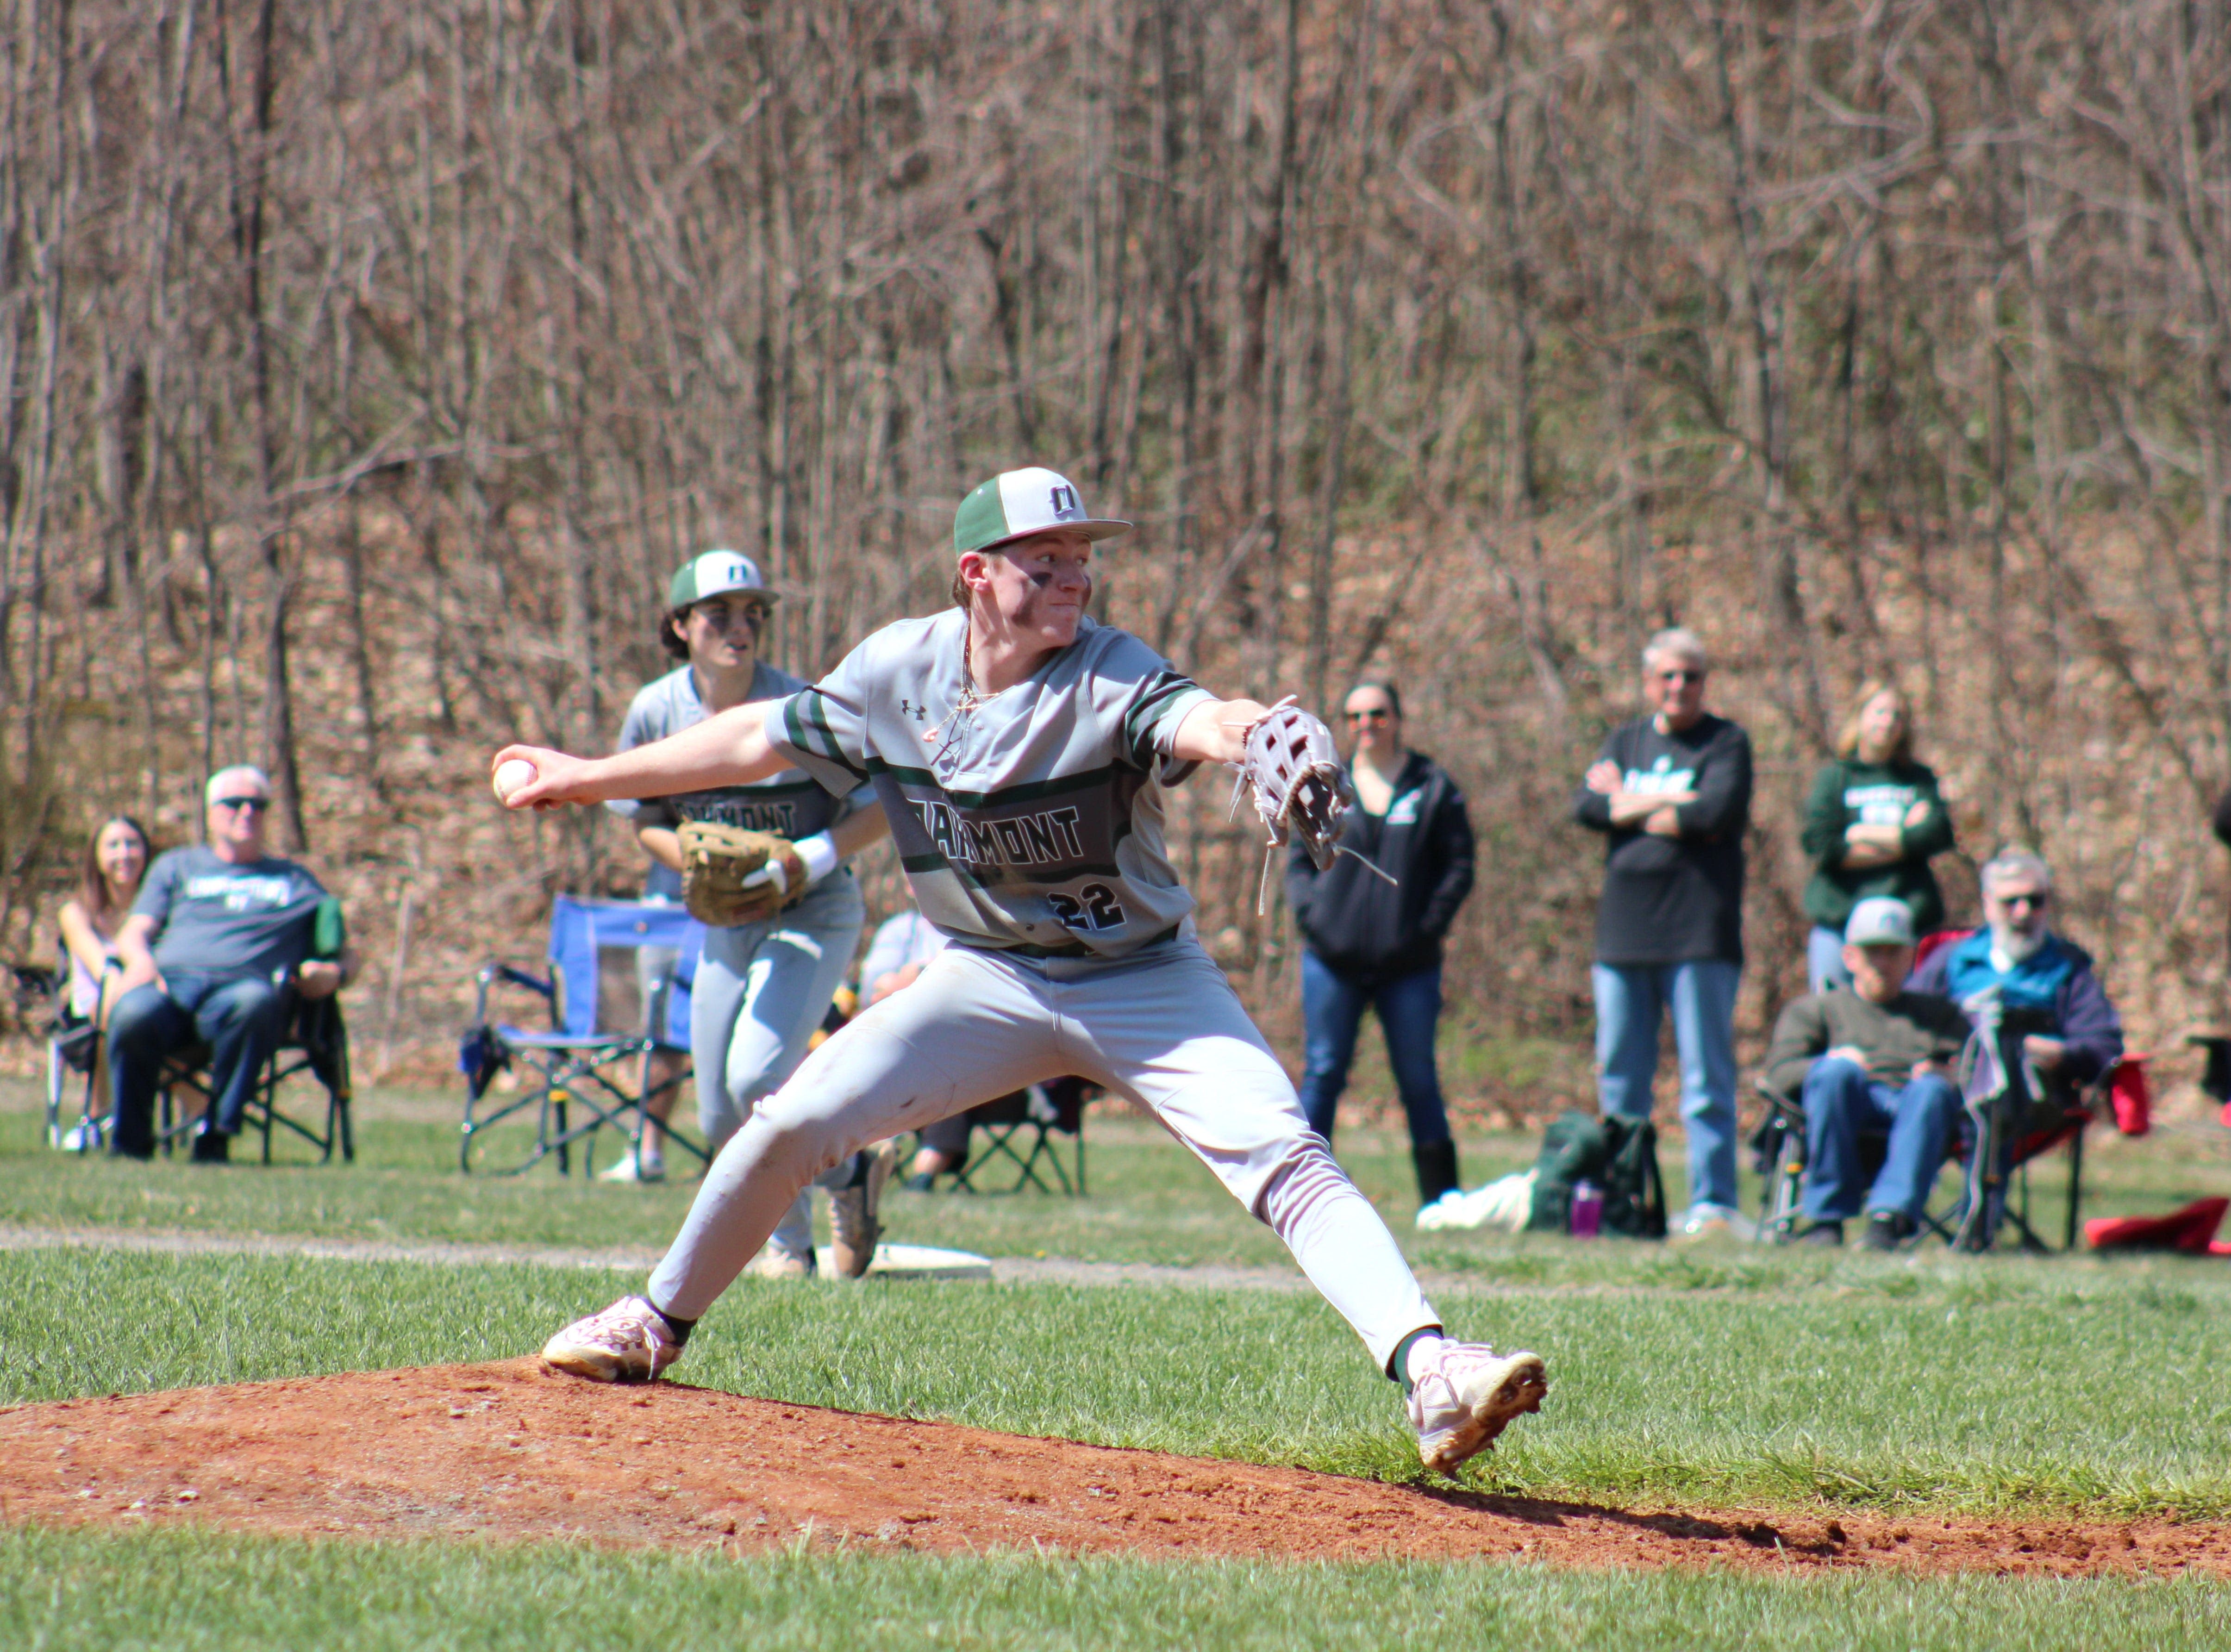 Gardner-area sports: Oakmont baseball earns top seed in sectional tournament & more